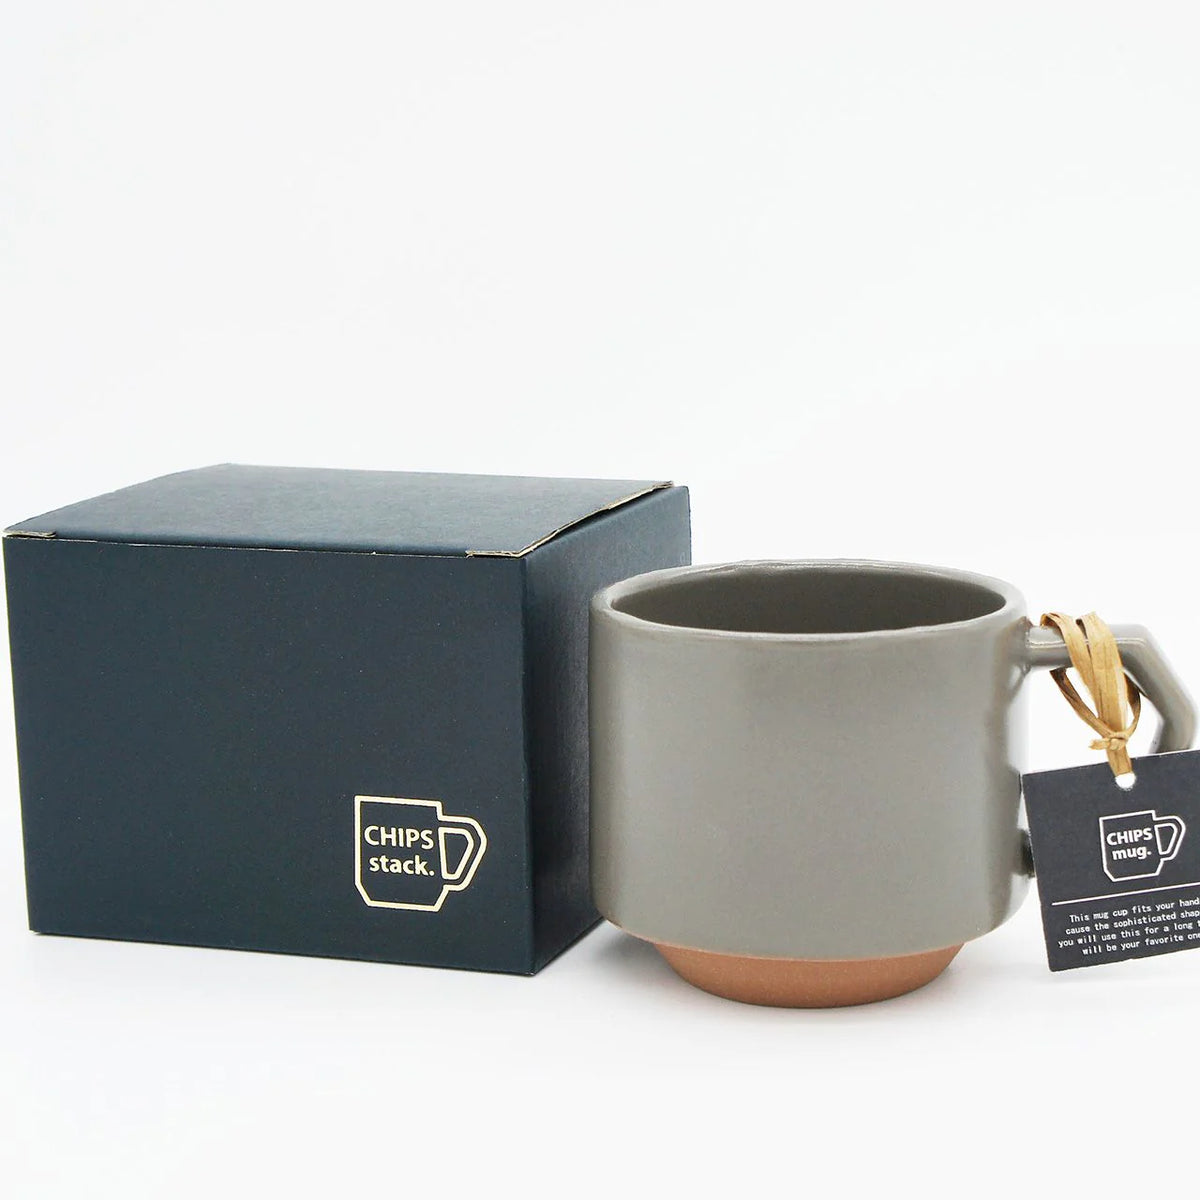 A Stacking Mug - Khaki with a tag in front of a stackable box.